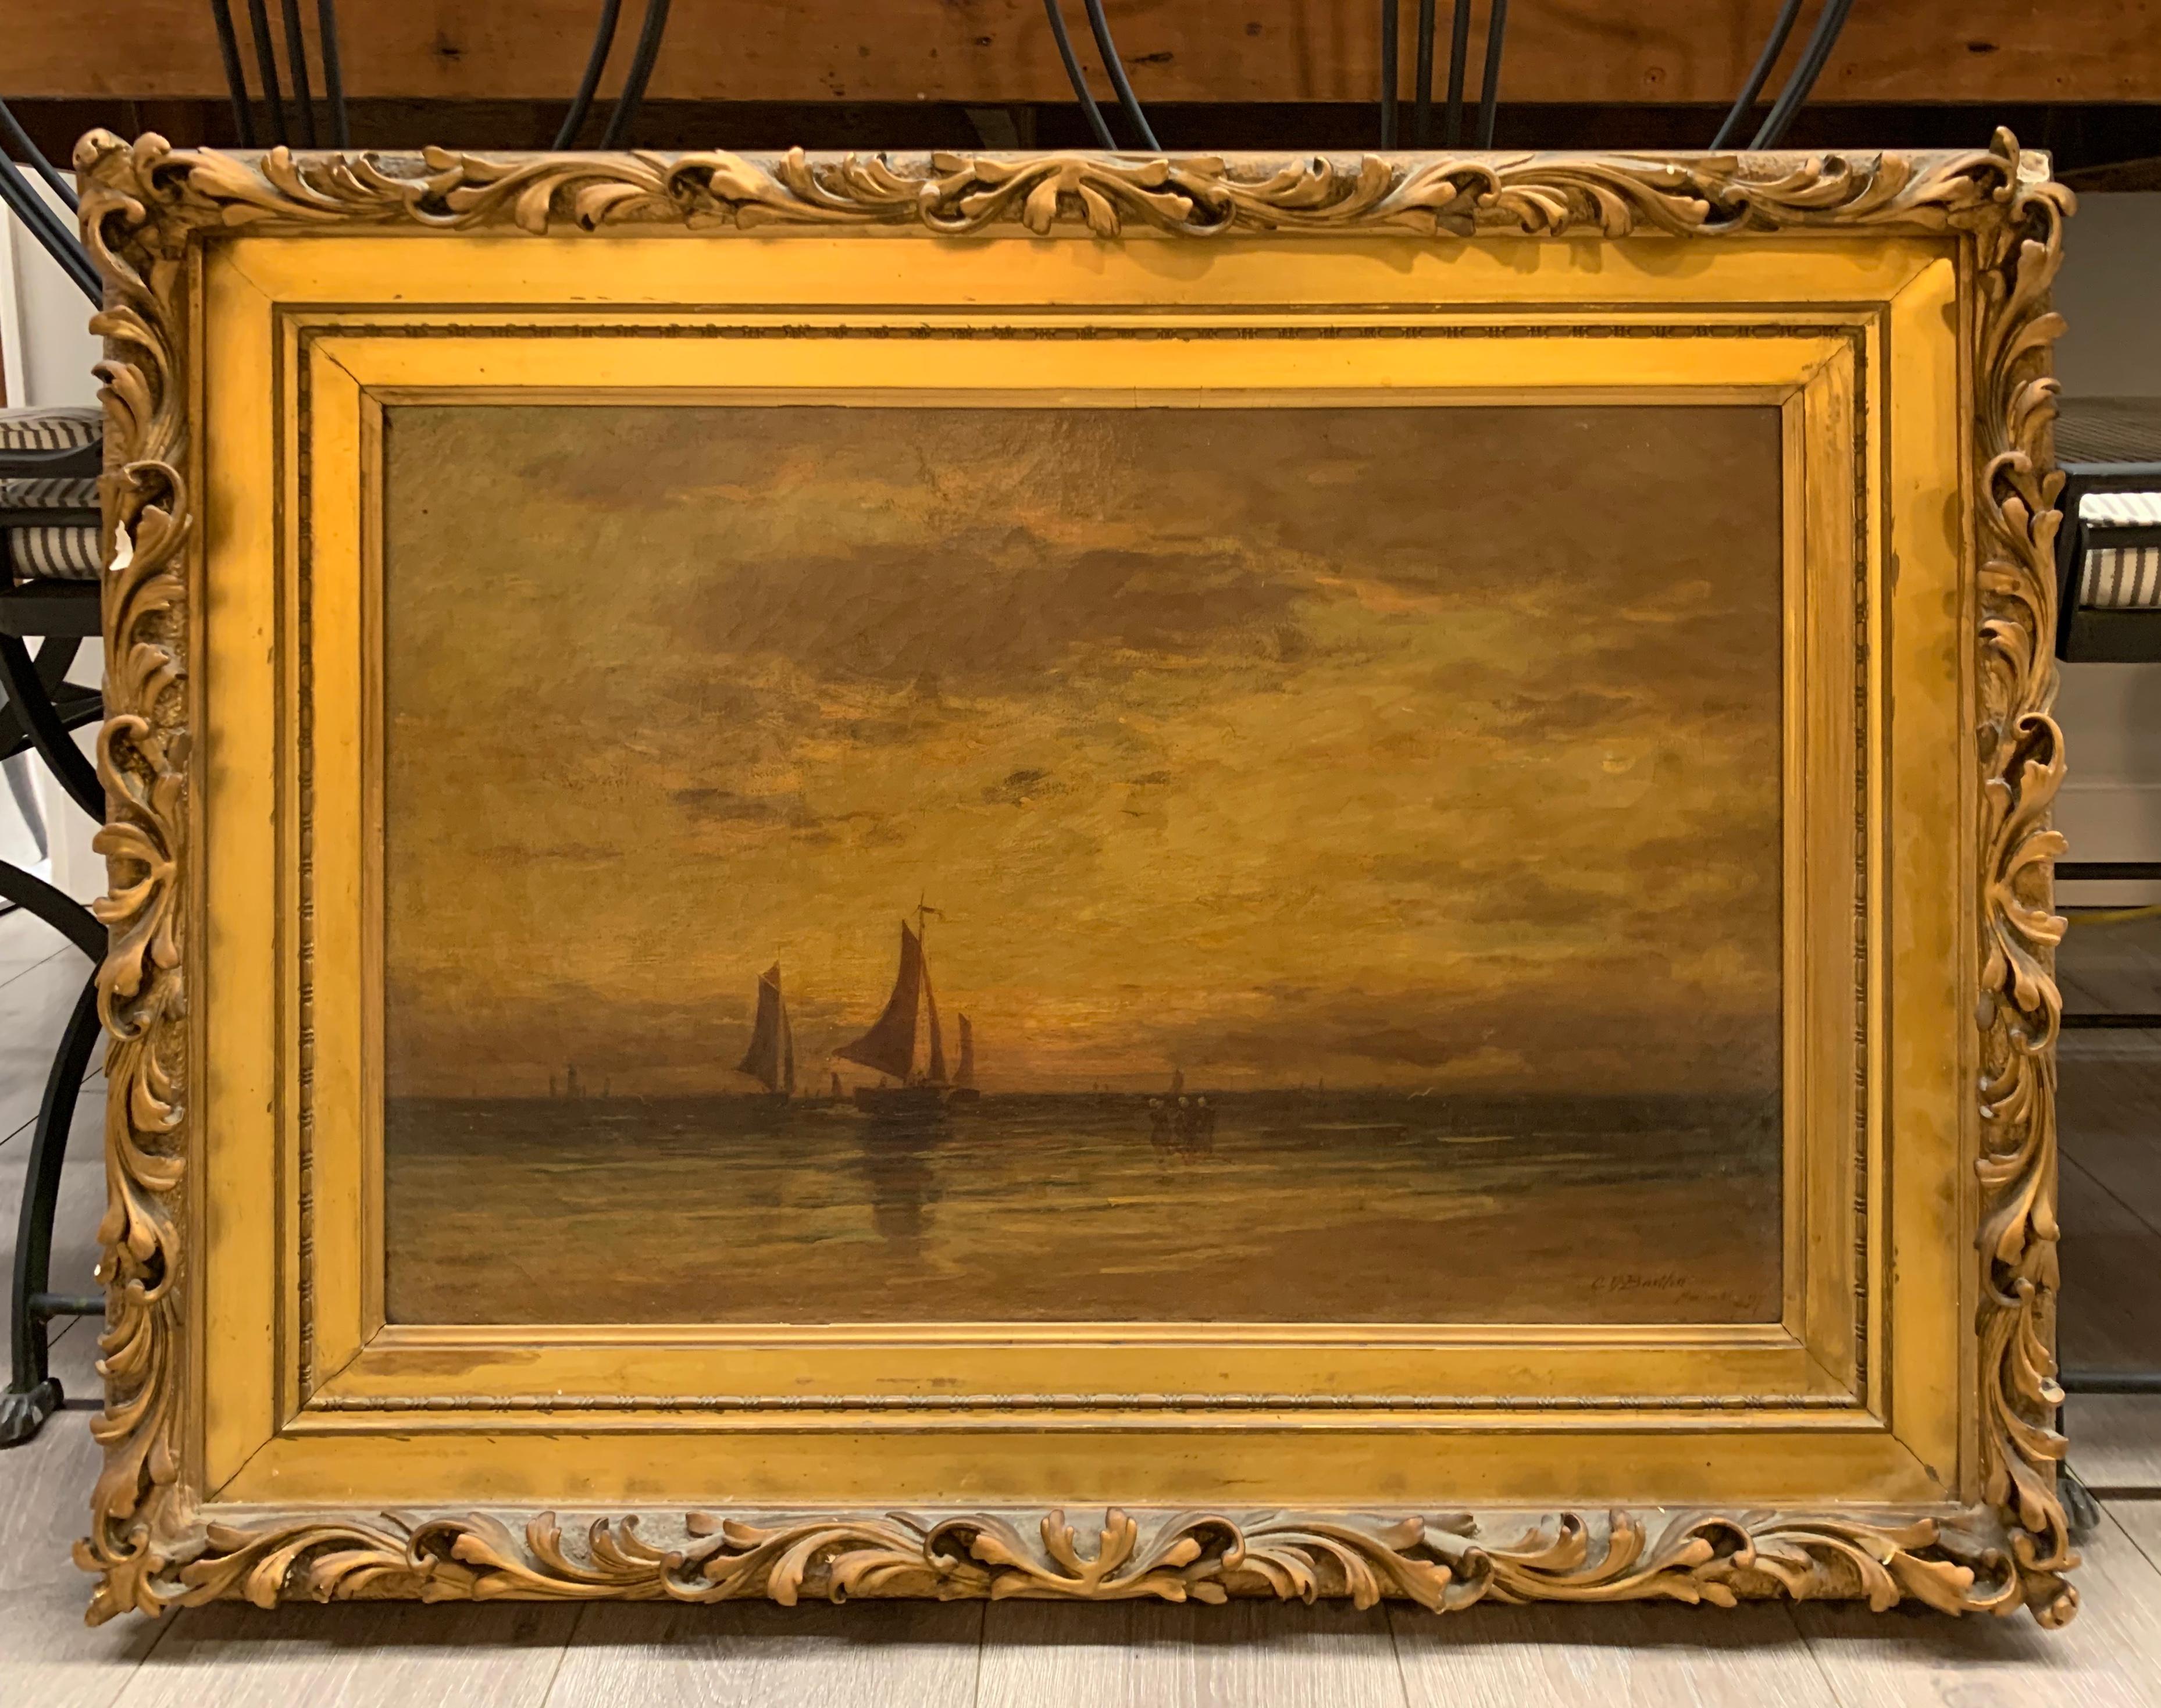 Signed C.D. Bartlutte antique oil on canvas nautical seascape. The work of art is dark and foreboding with ships in the distance. The gilt frame has some chipping and is original. Great turn of the century oil.